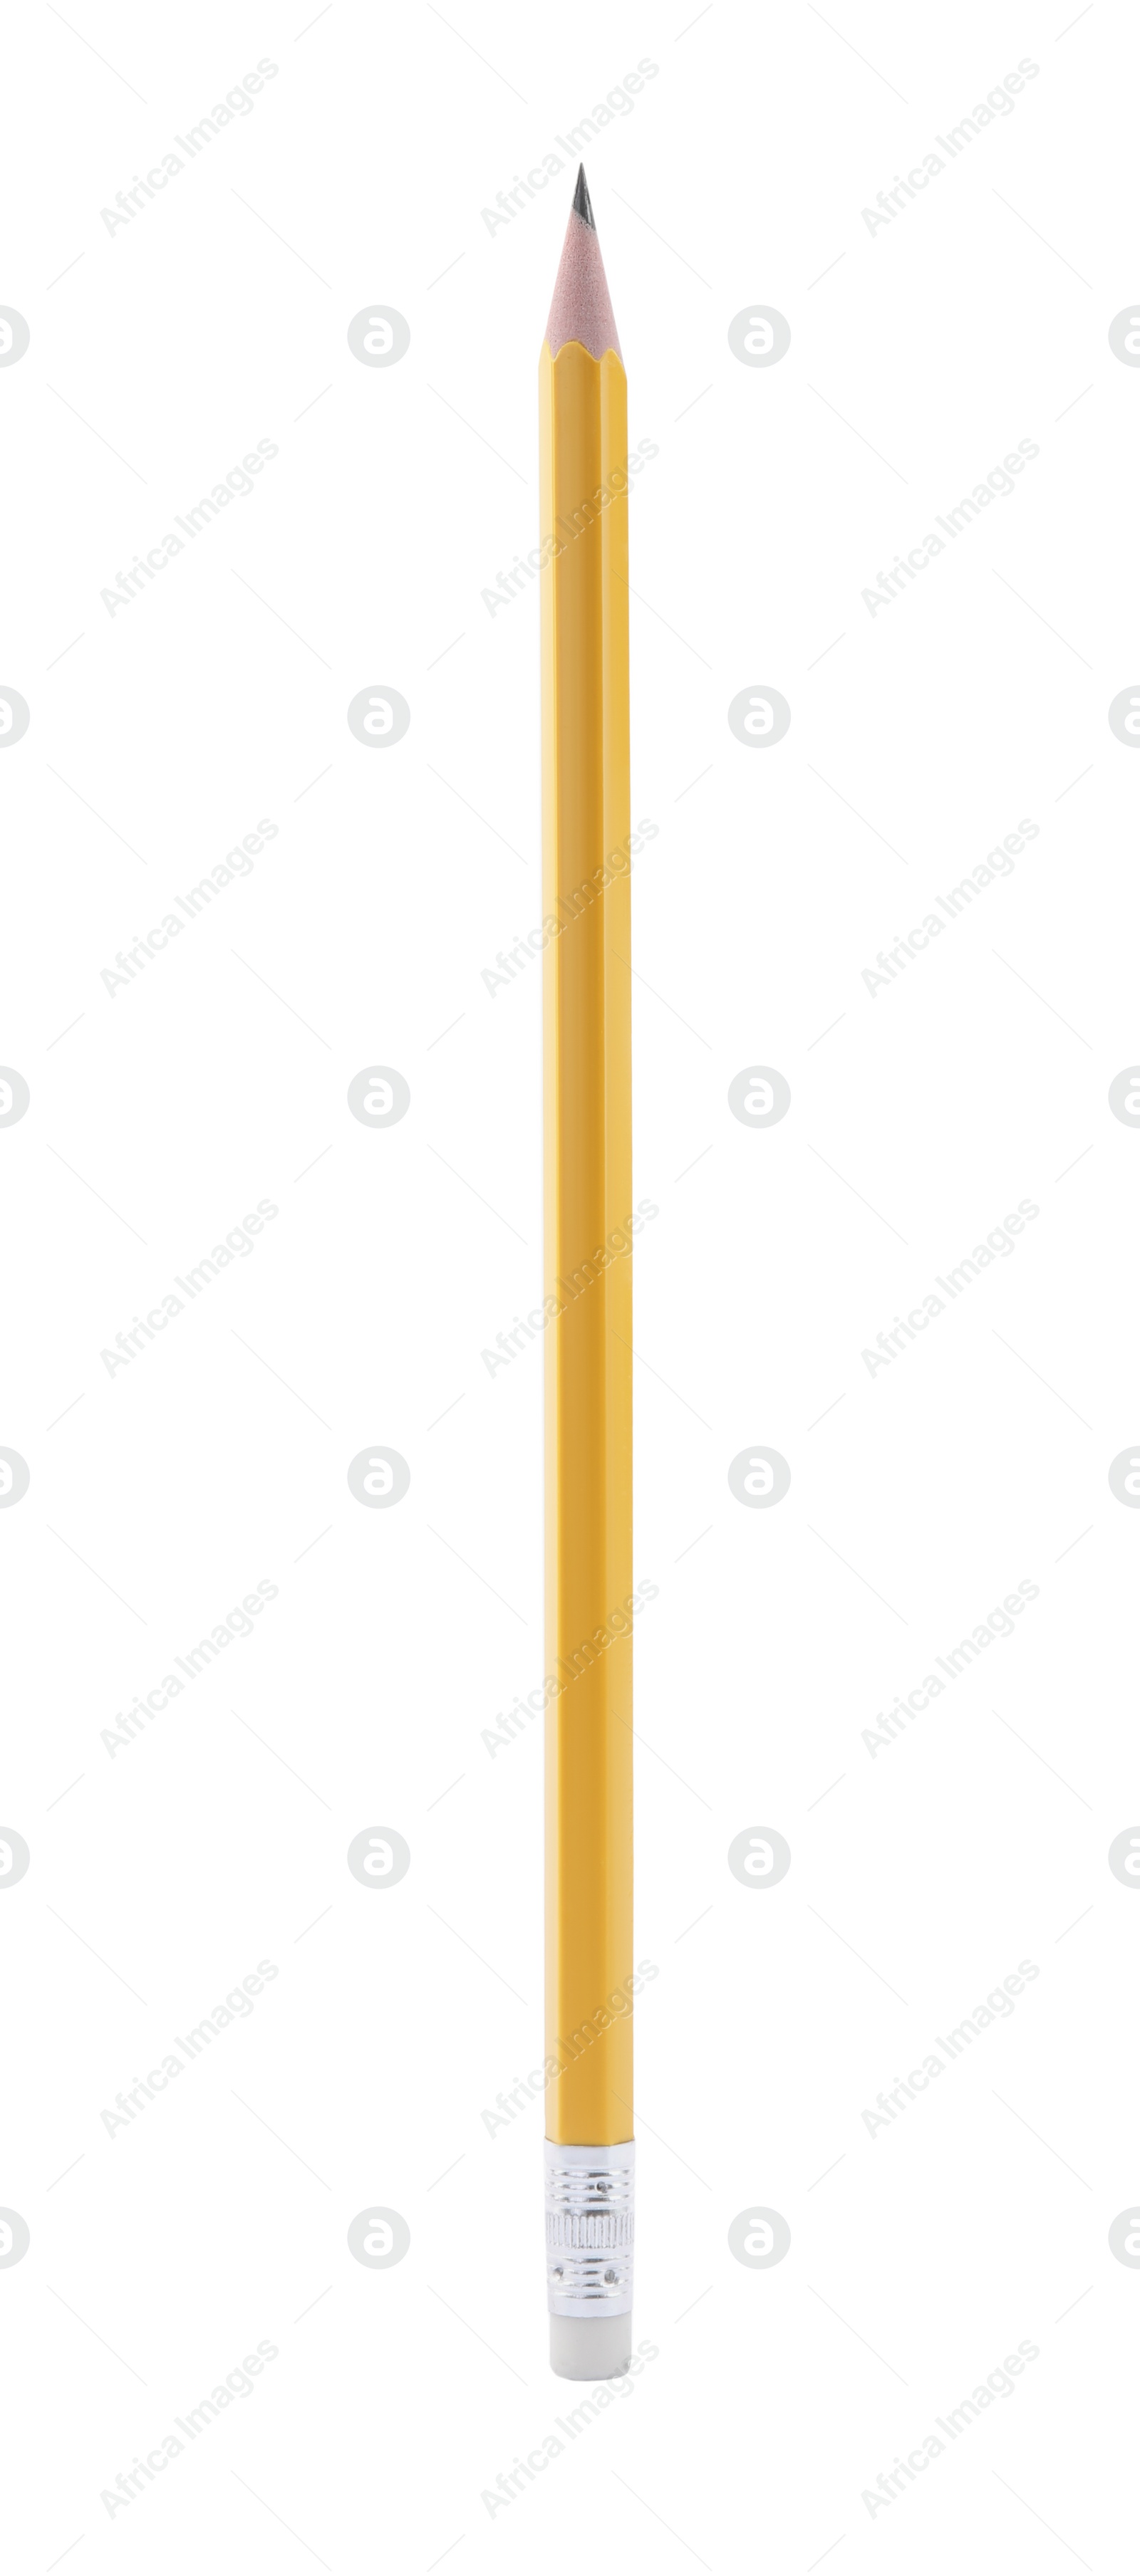 Photo of One sharp graphite pencil isolated on white